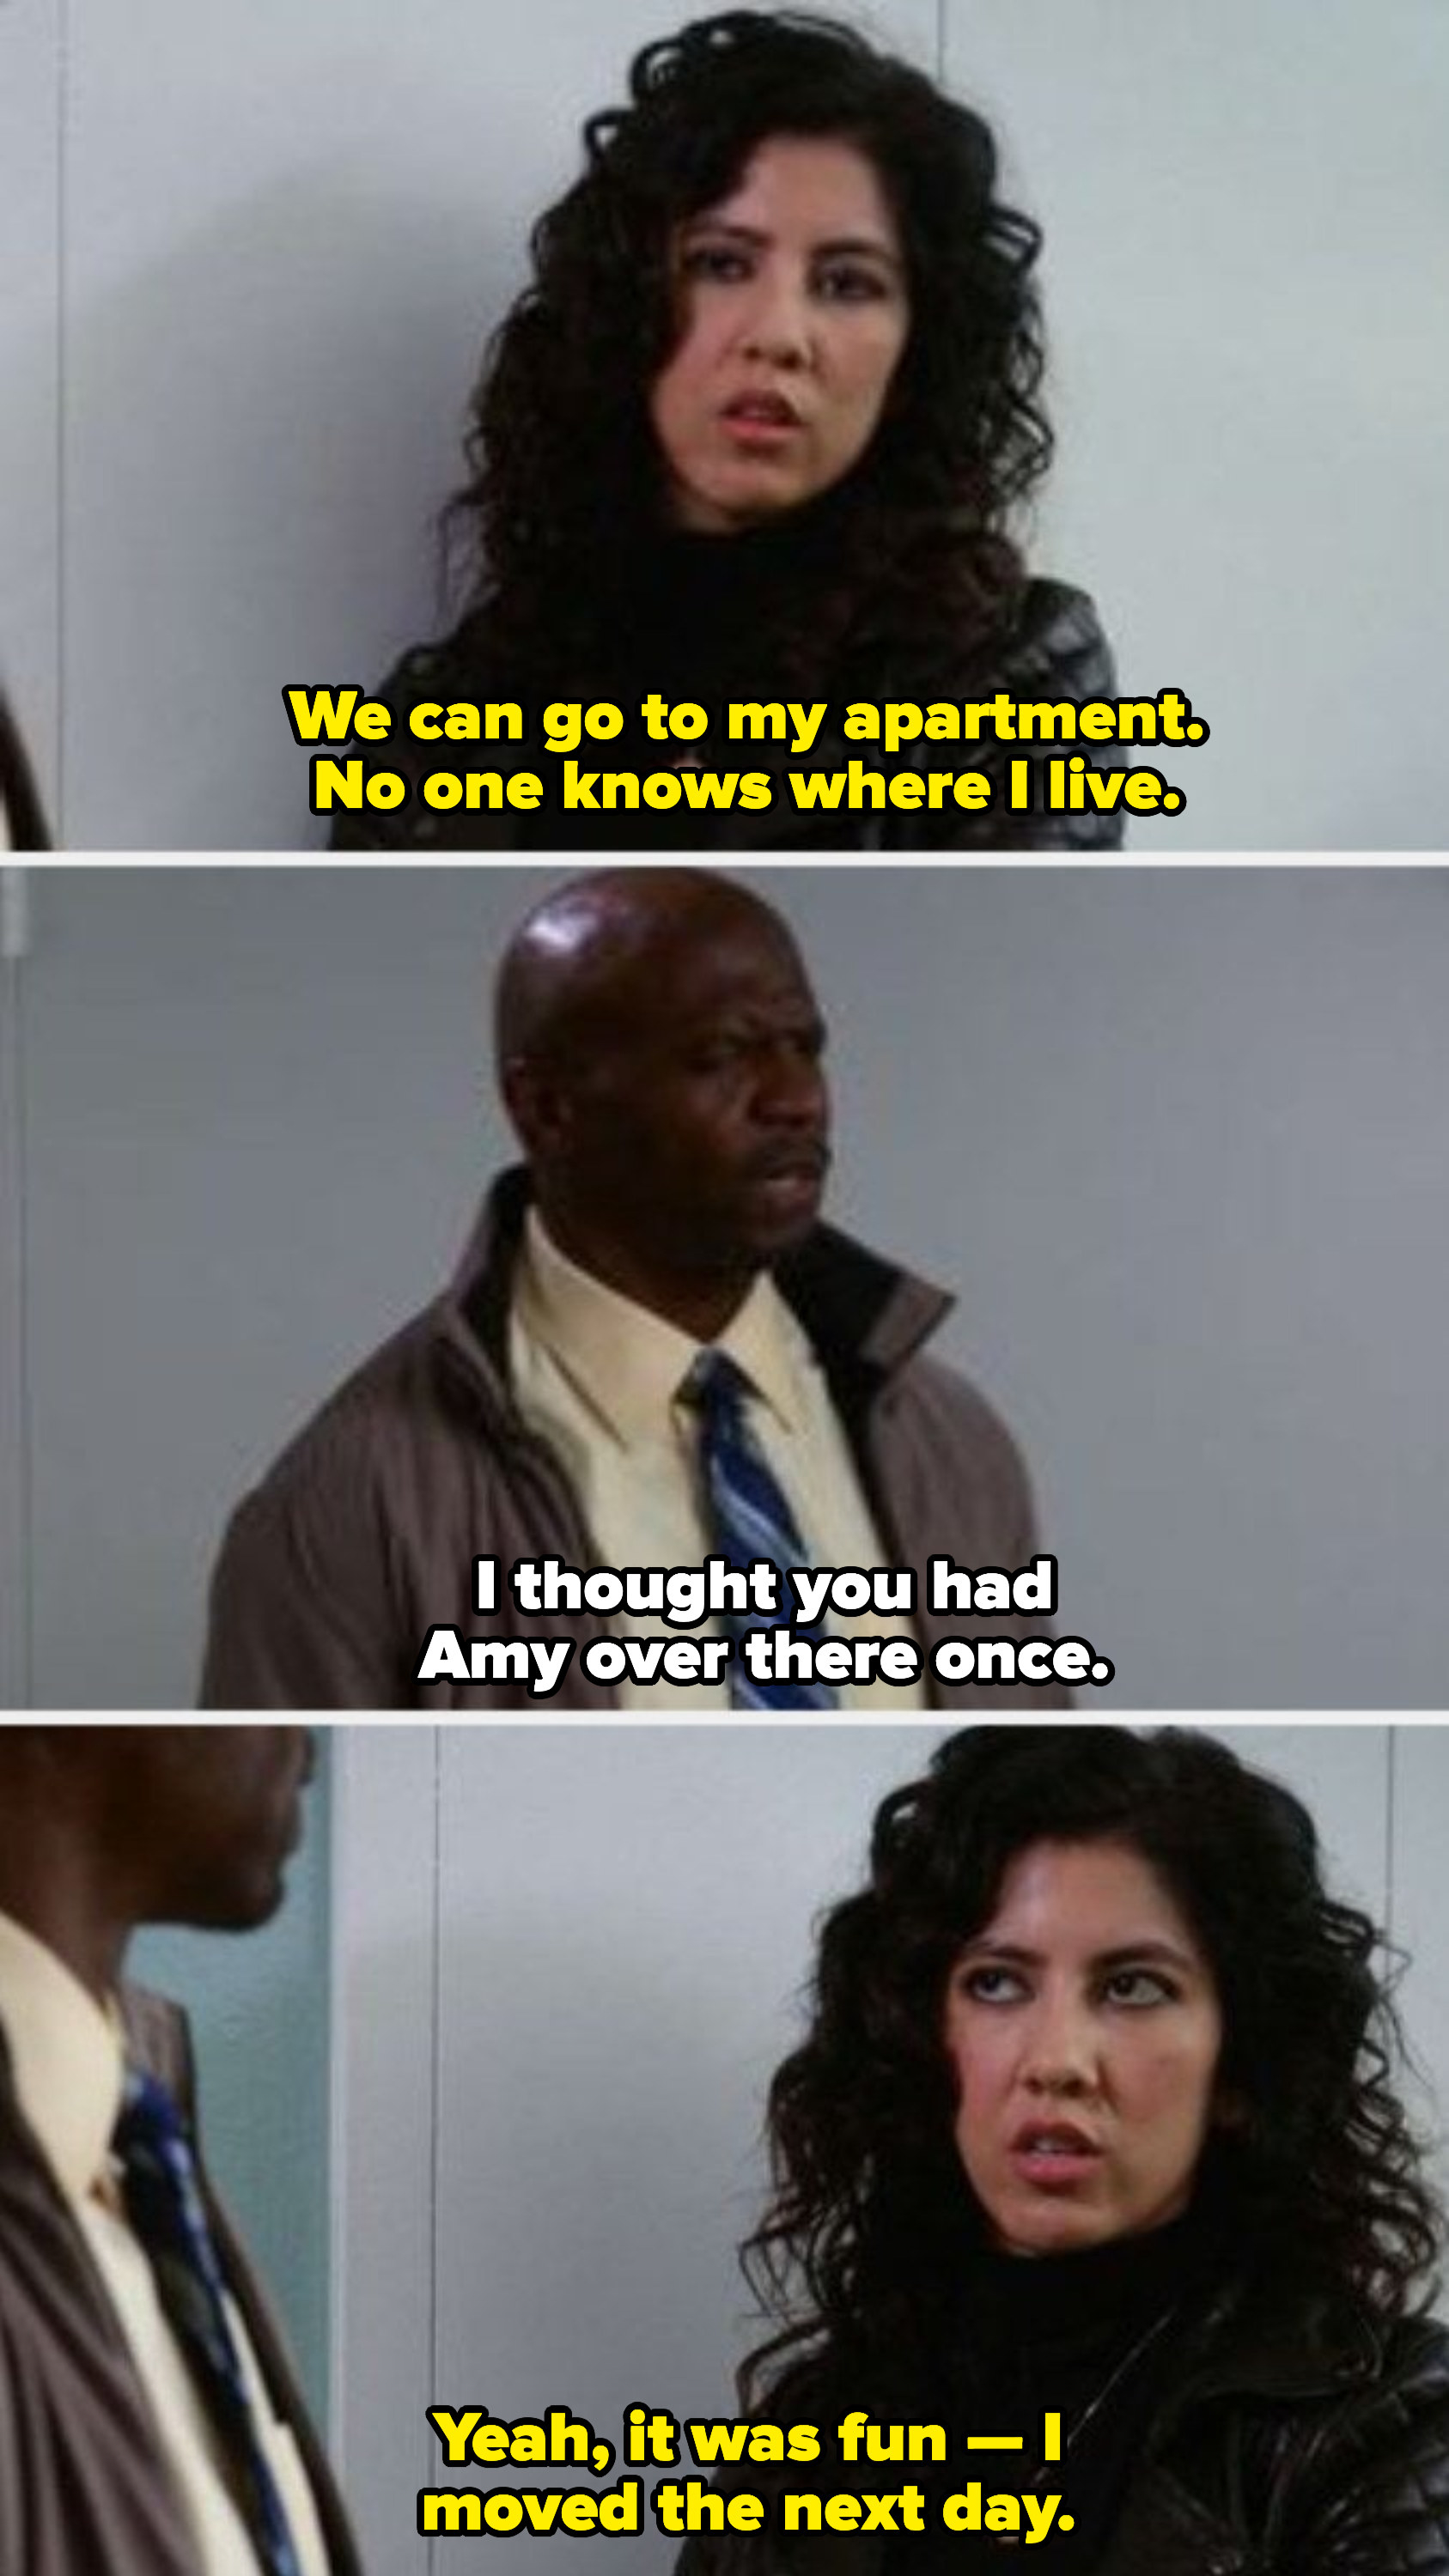 Rosa: &quot;We can go to my apartment. No one knows where I live.&quot; Terry: I thought you had Amy over there once.&quot; Rosa: &quot;Yeah, it was fun — I moved the next day&quot;